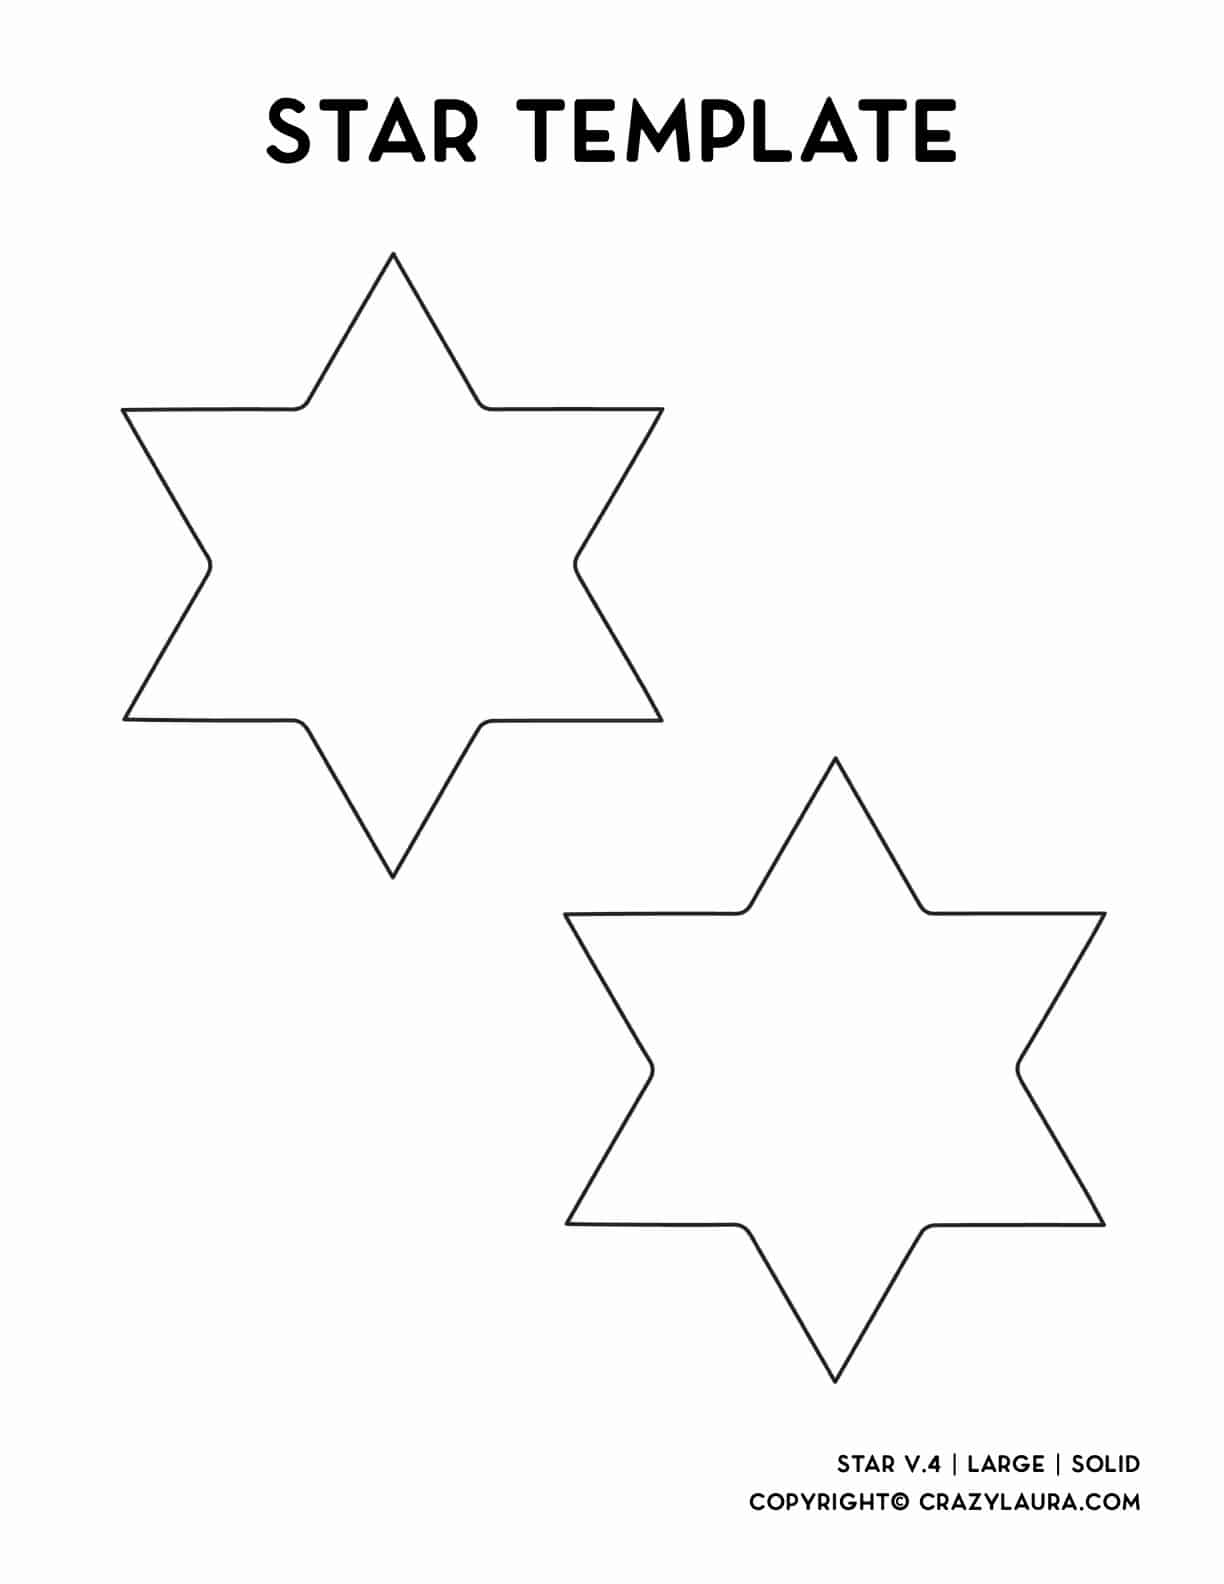 6 point free star template to print off